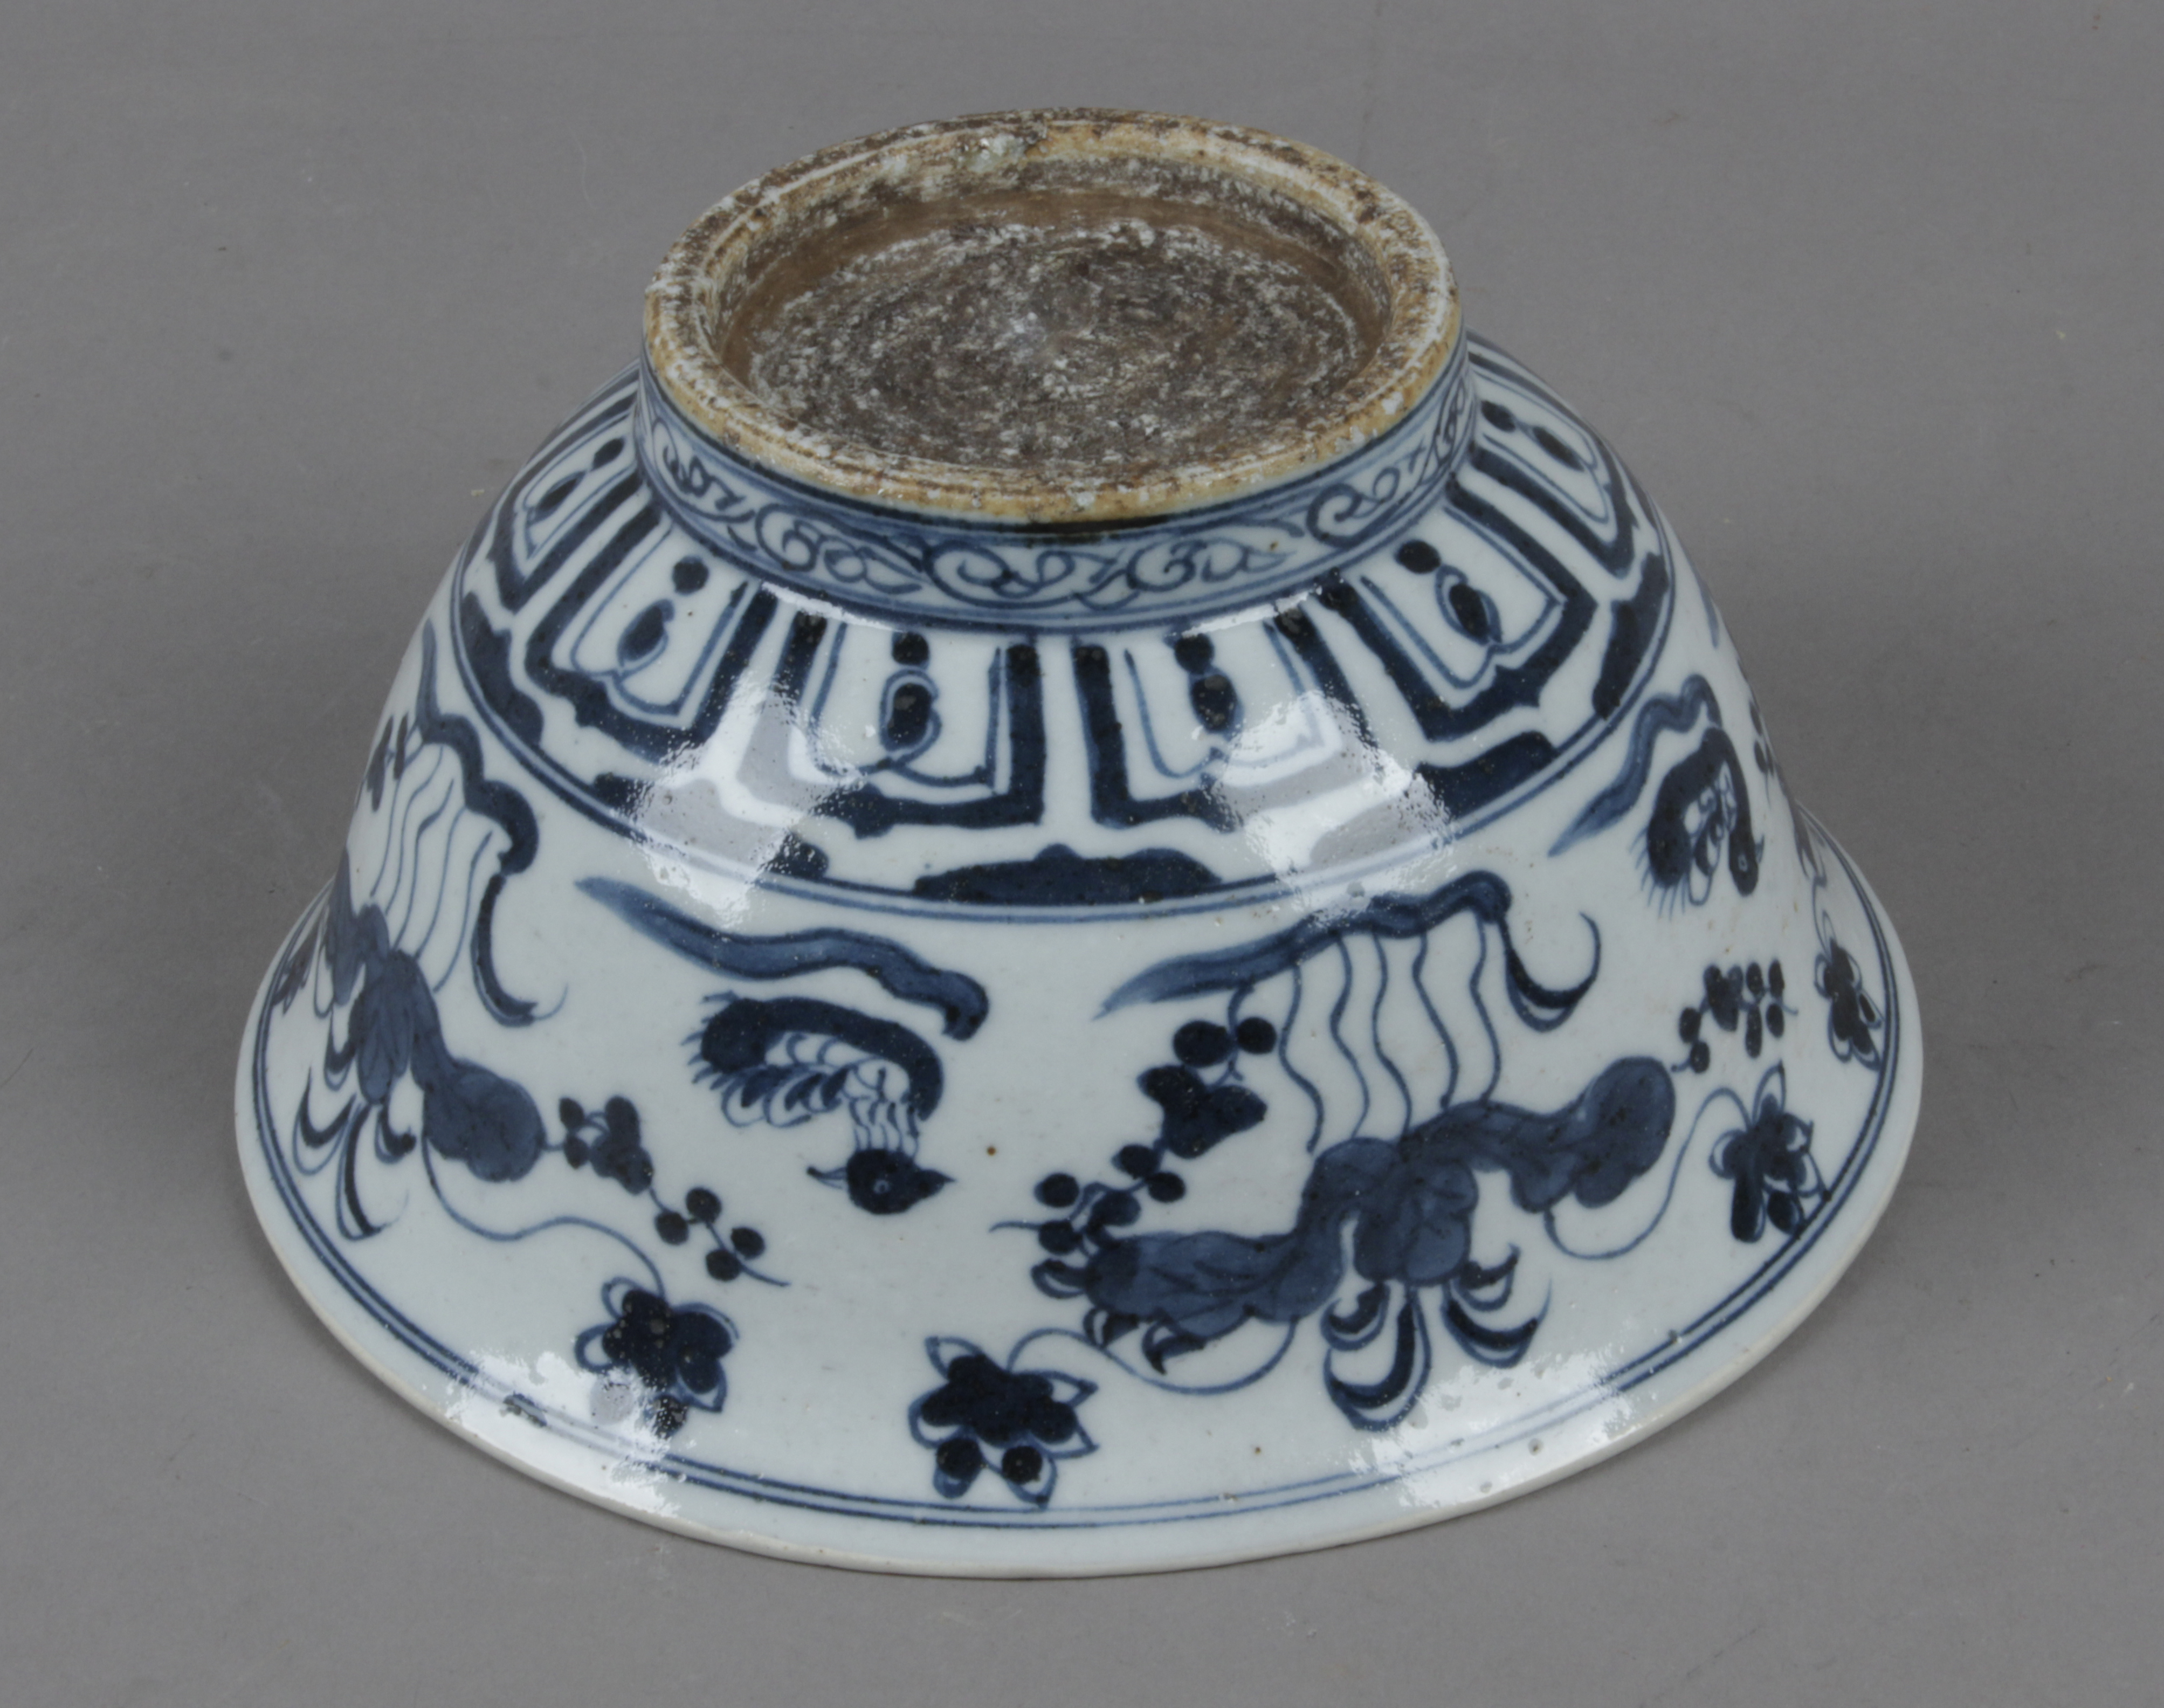 A 20th century Chinese porcelain bowl - Image 4 of 5